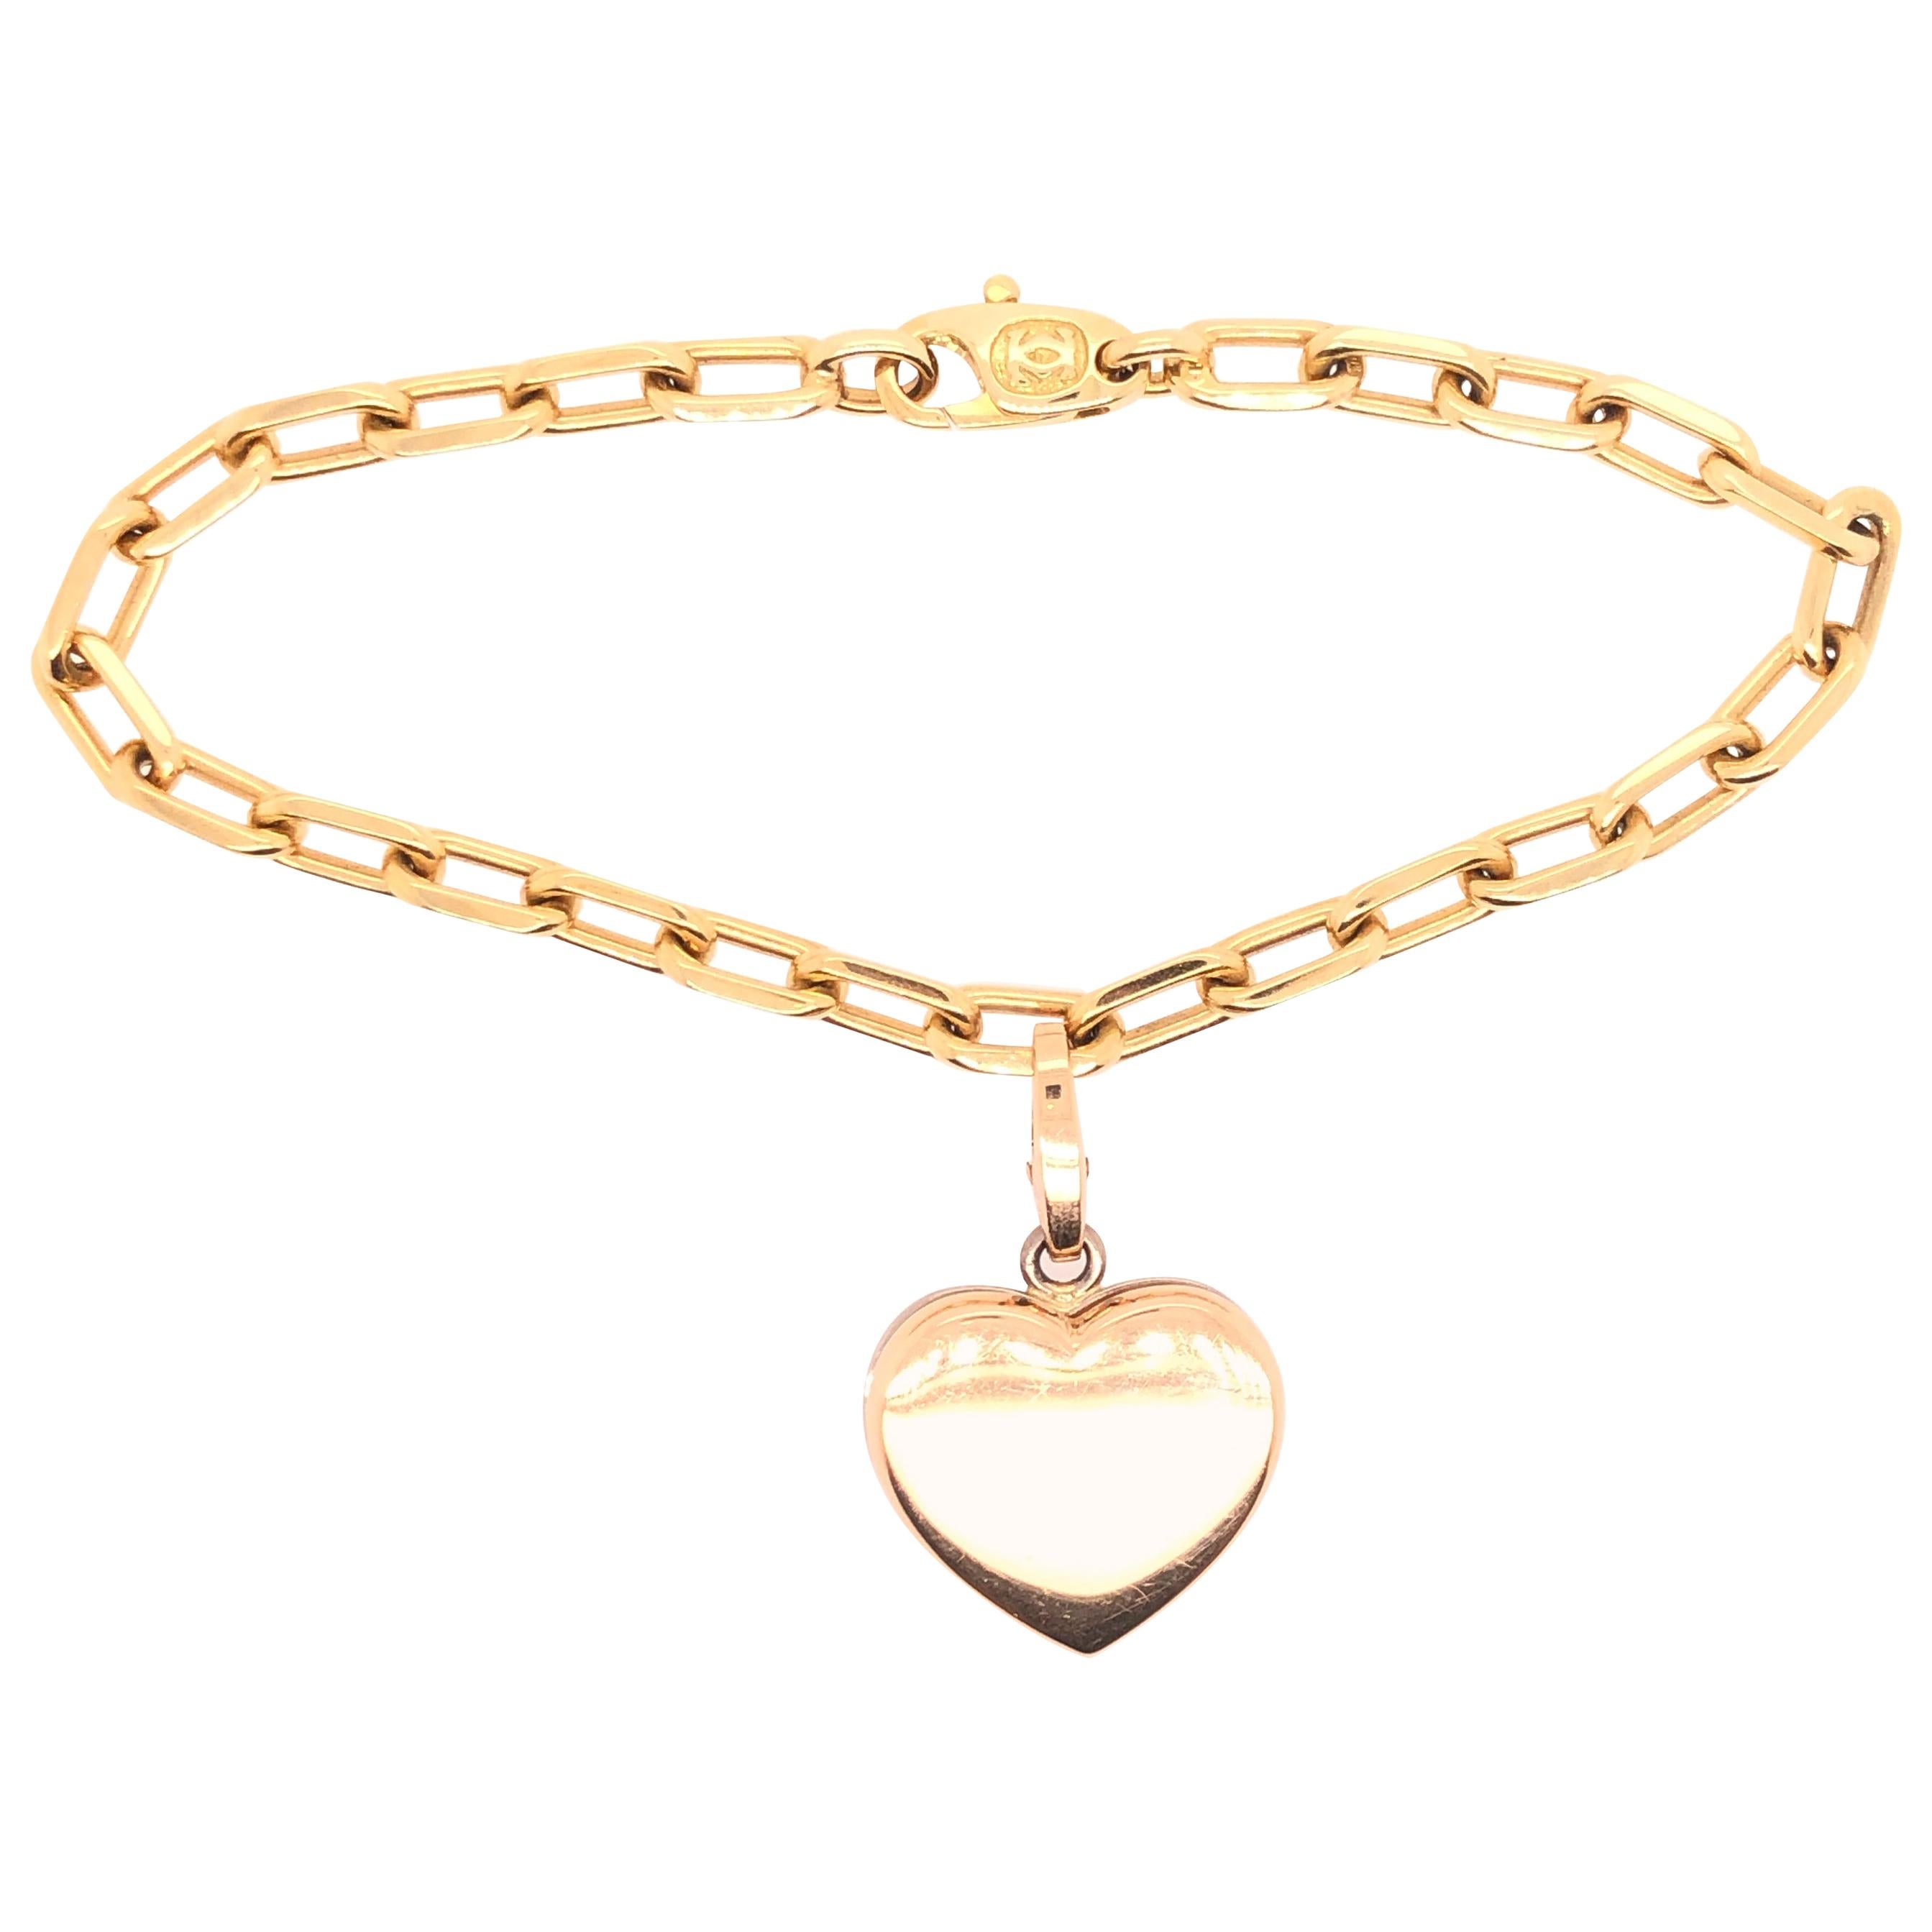 CARTIER C HEART 18K YELLOW GOLD BRACELET for sale at auction on 17th March  | Bidsquare